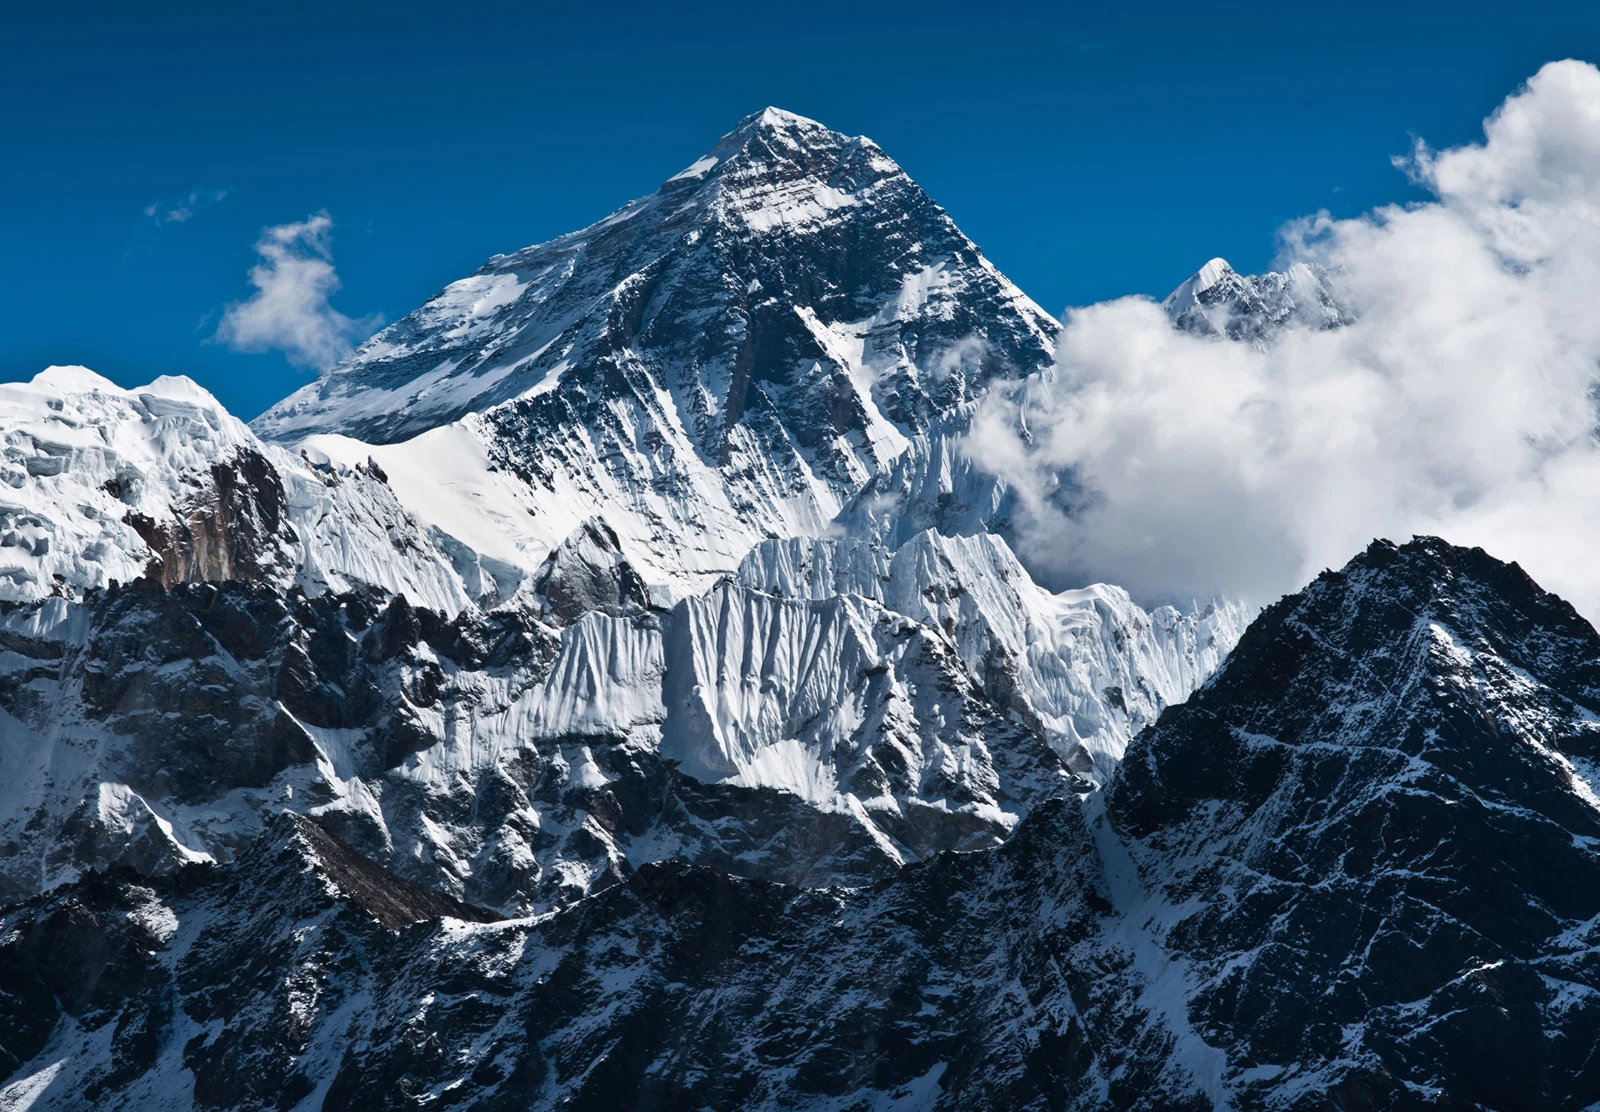 Three Indian climbers banned by Nepal for faking Everest summit